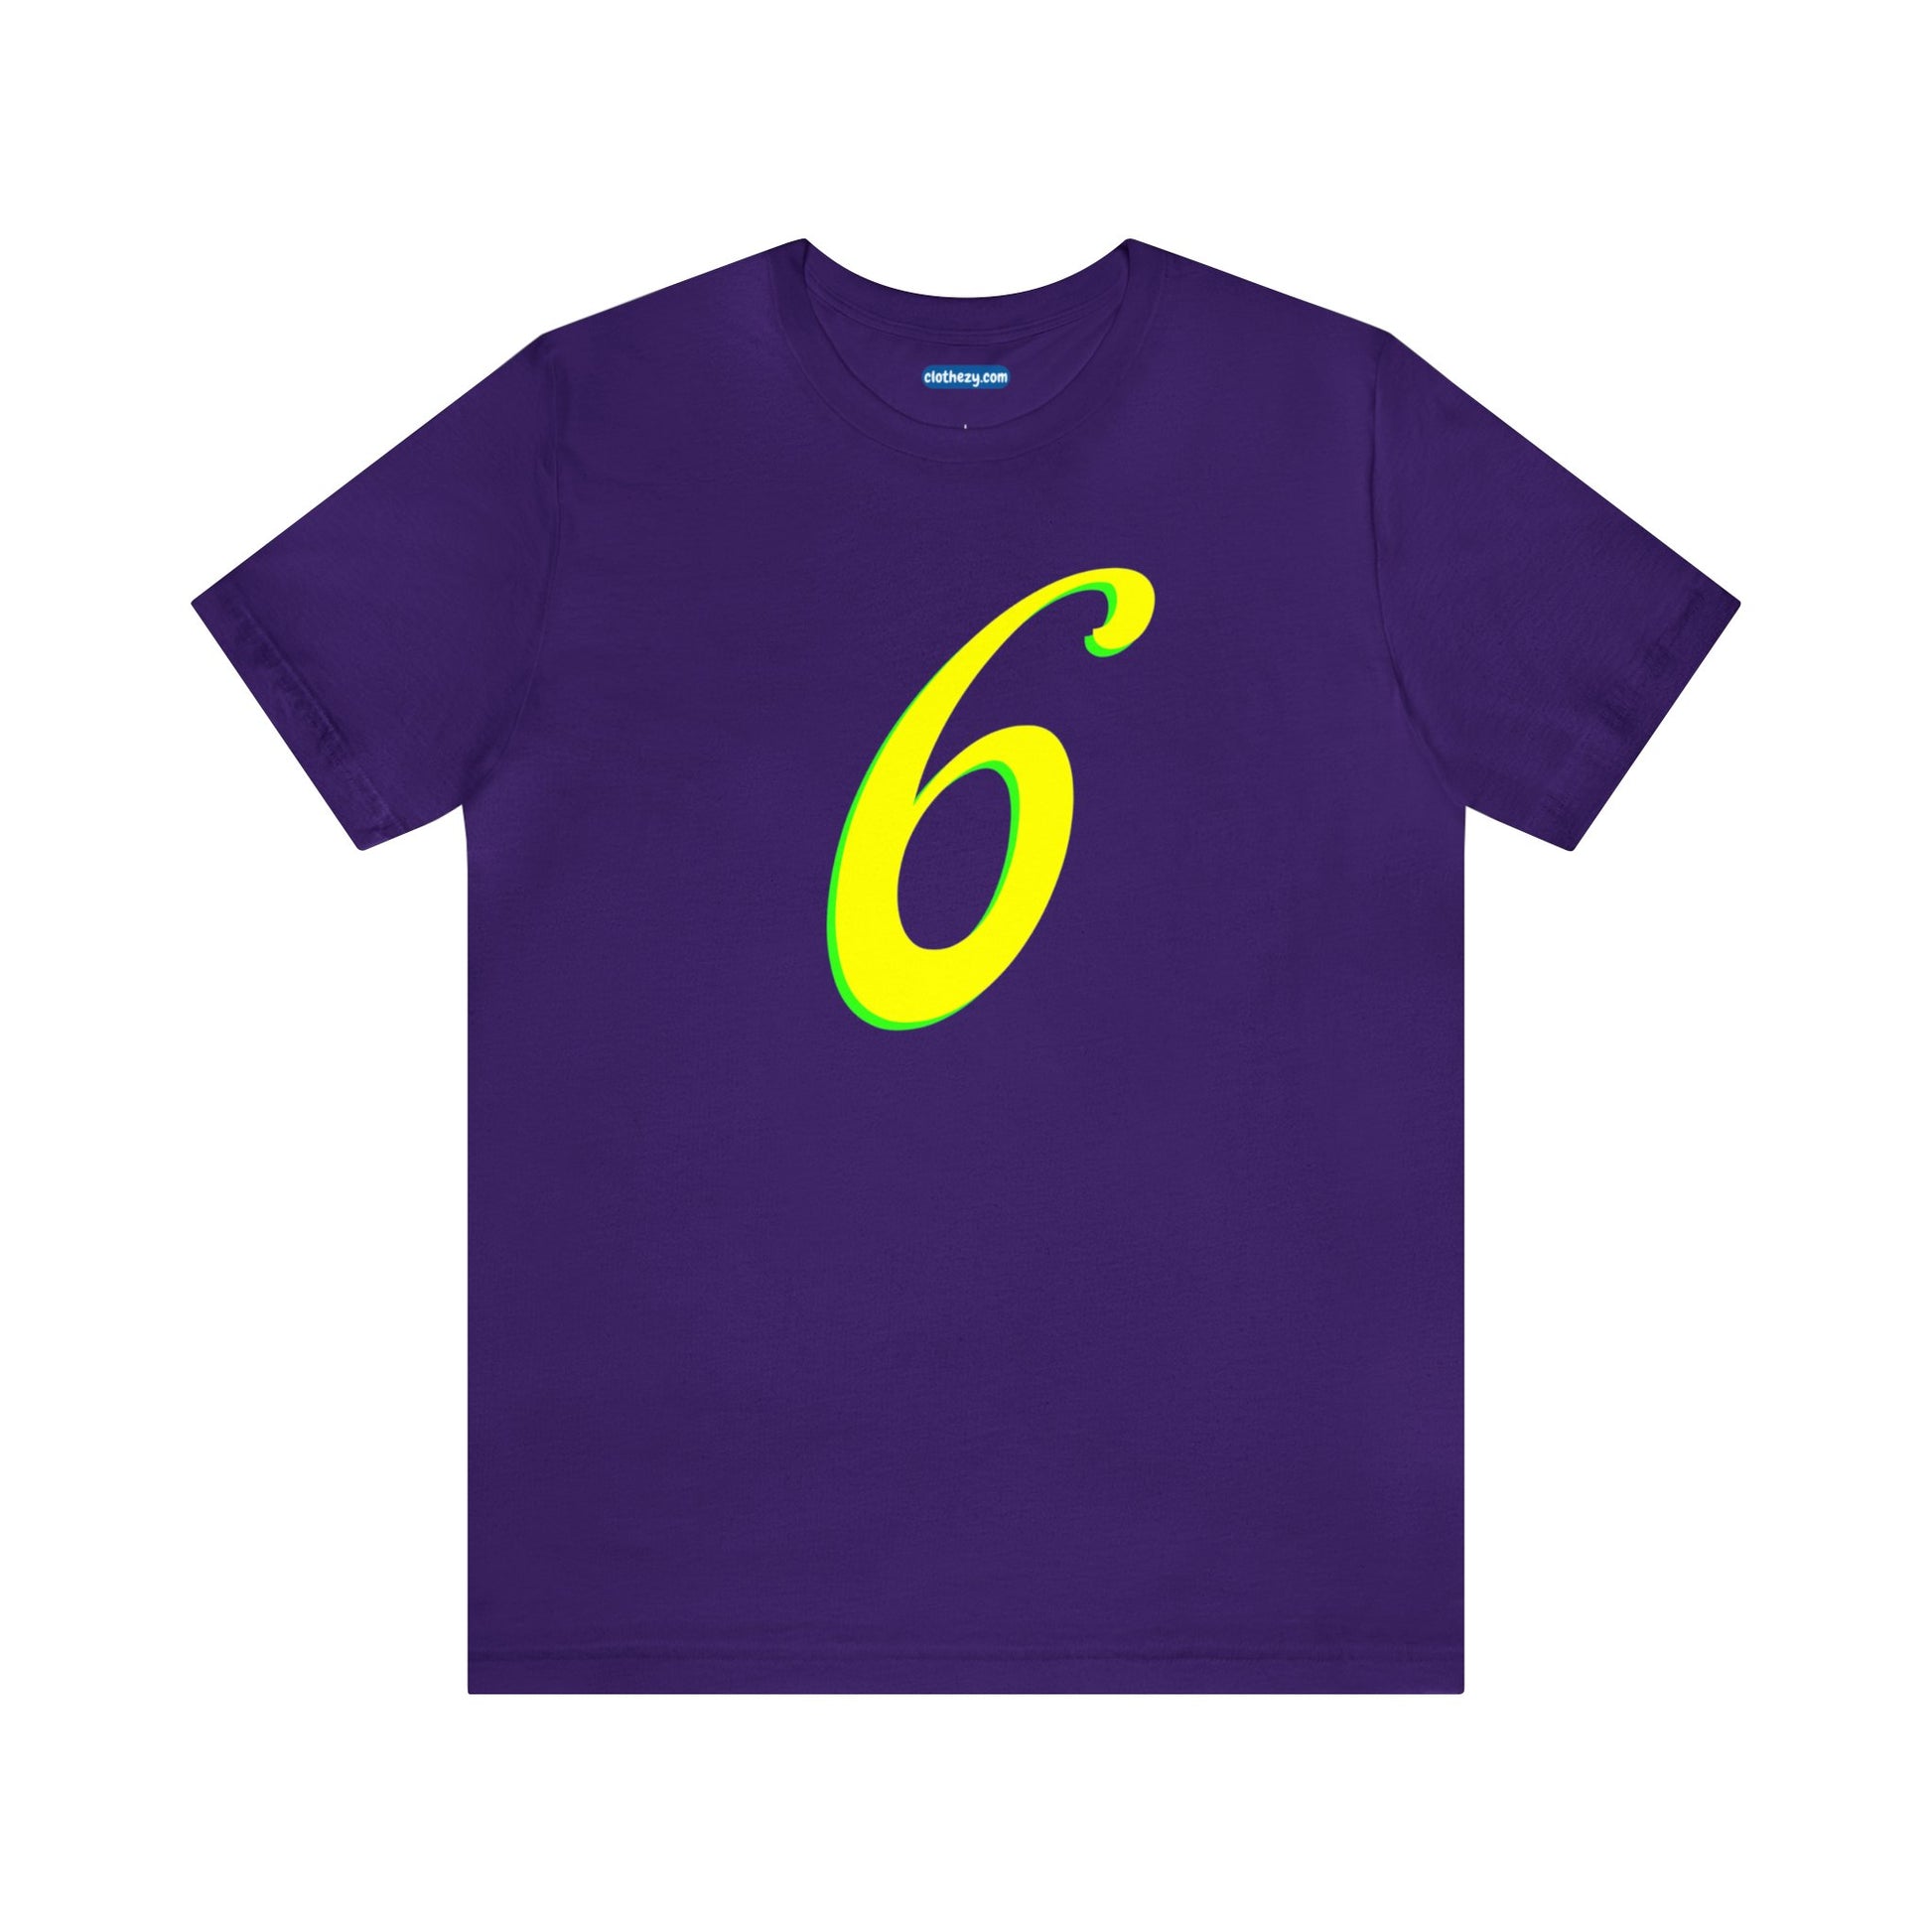 Number 6 Design - Soft Cotton Tee for birthdays and celebrations, Gift for friends and family, Multiple Options by clothezy.com in Royal Blue Size Small - Buy Now